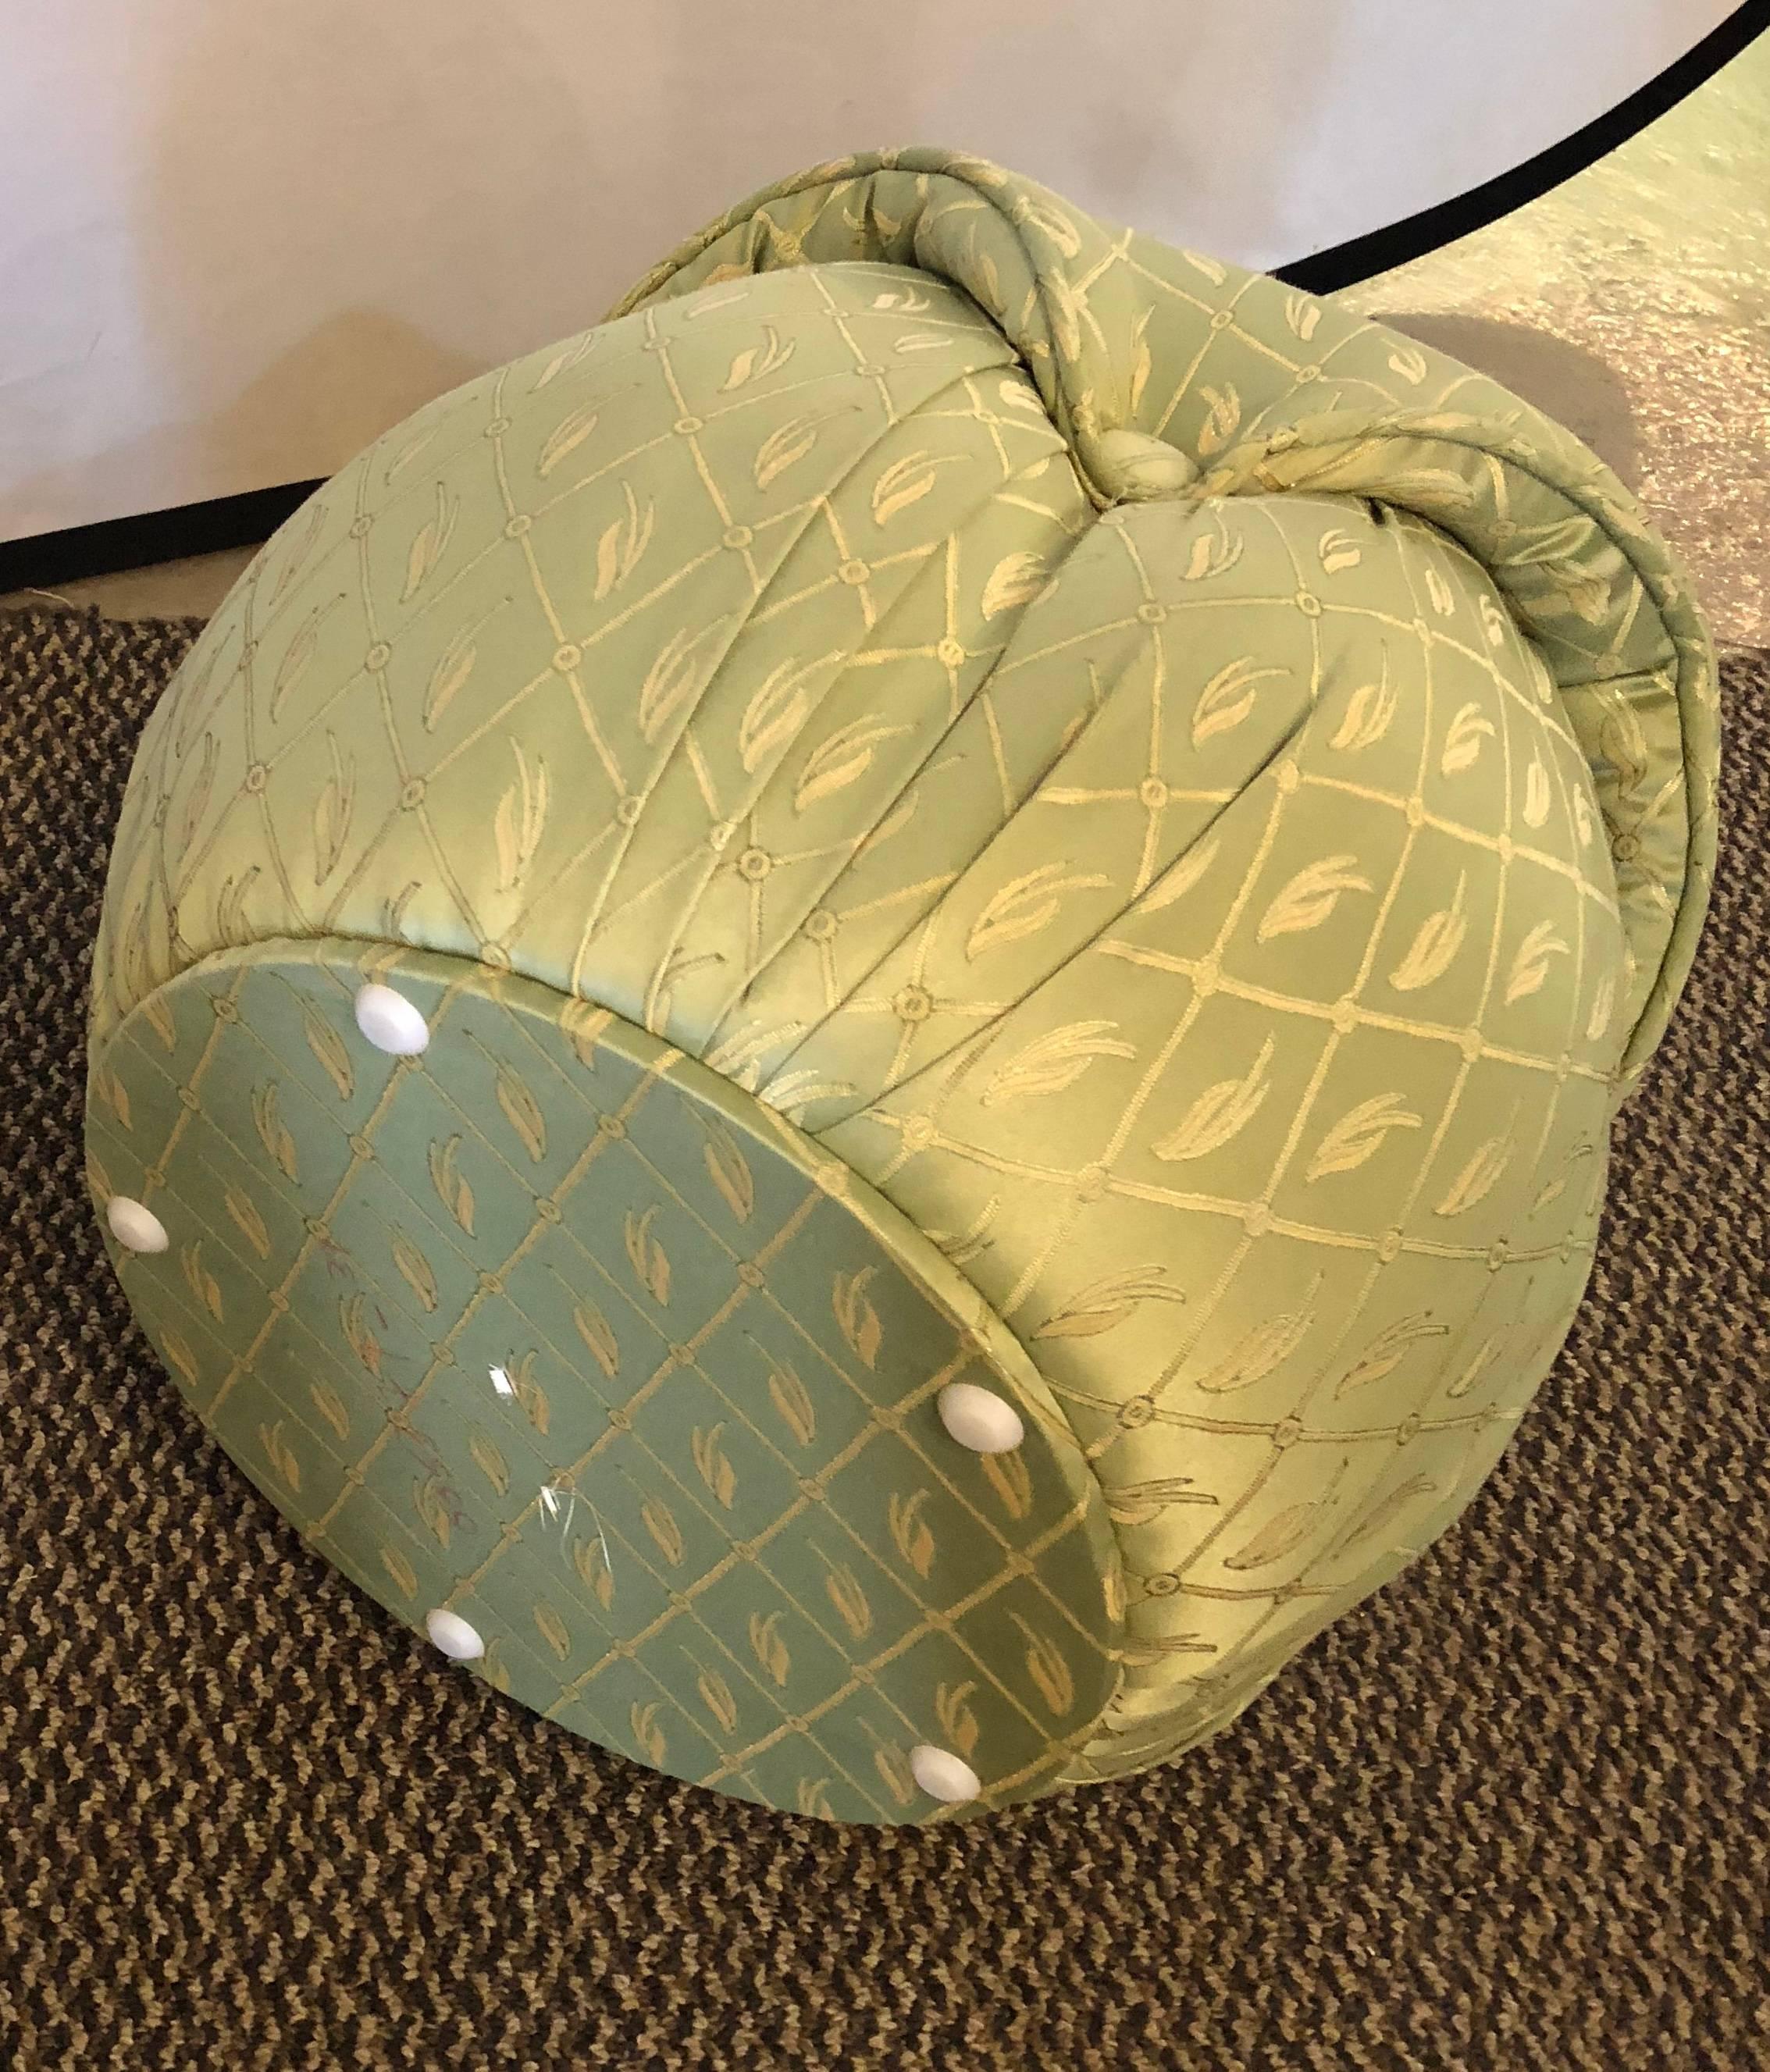 Pair of Hollywood Regency style finely upholstered mint green footstools / ottomans. A finely constructed pair of poofs that are wonderfully desirable.